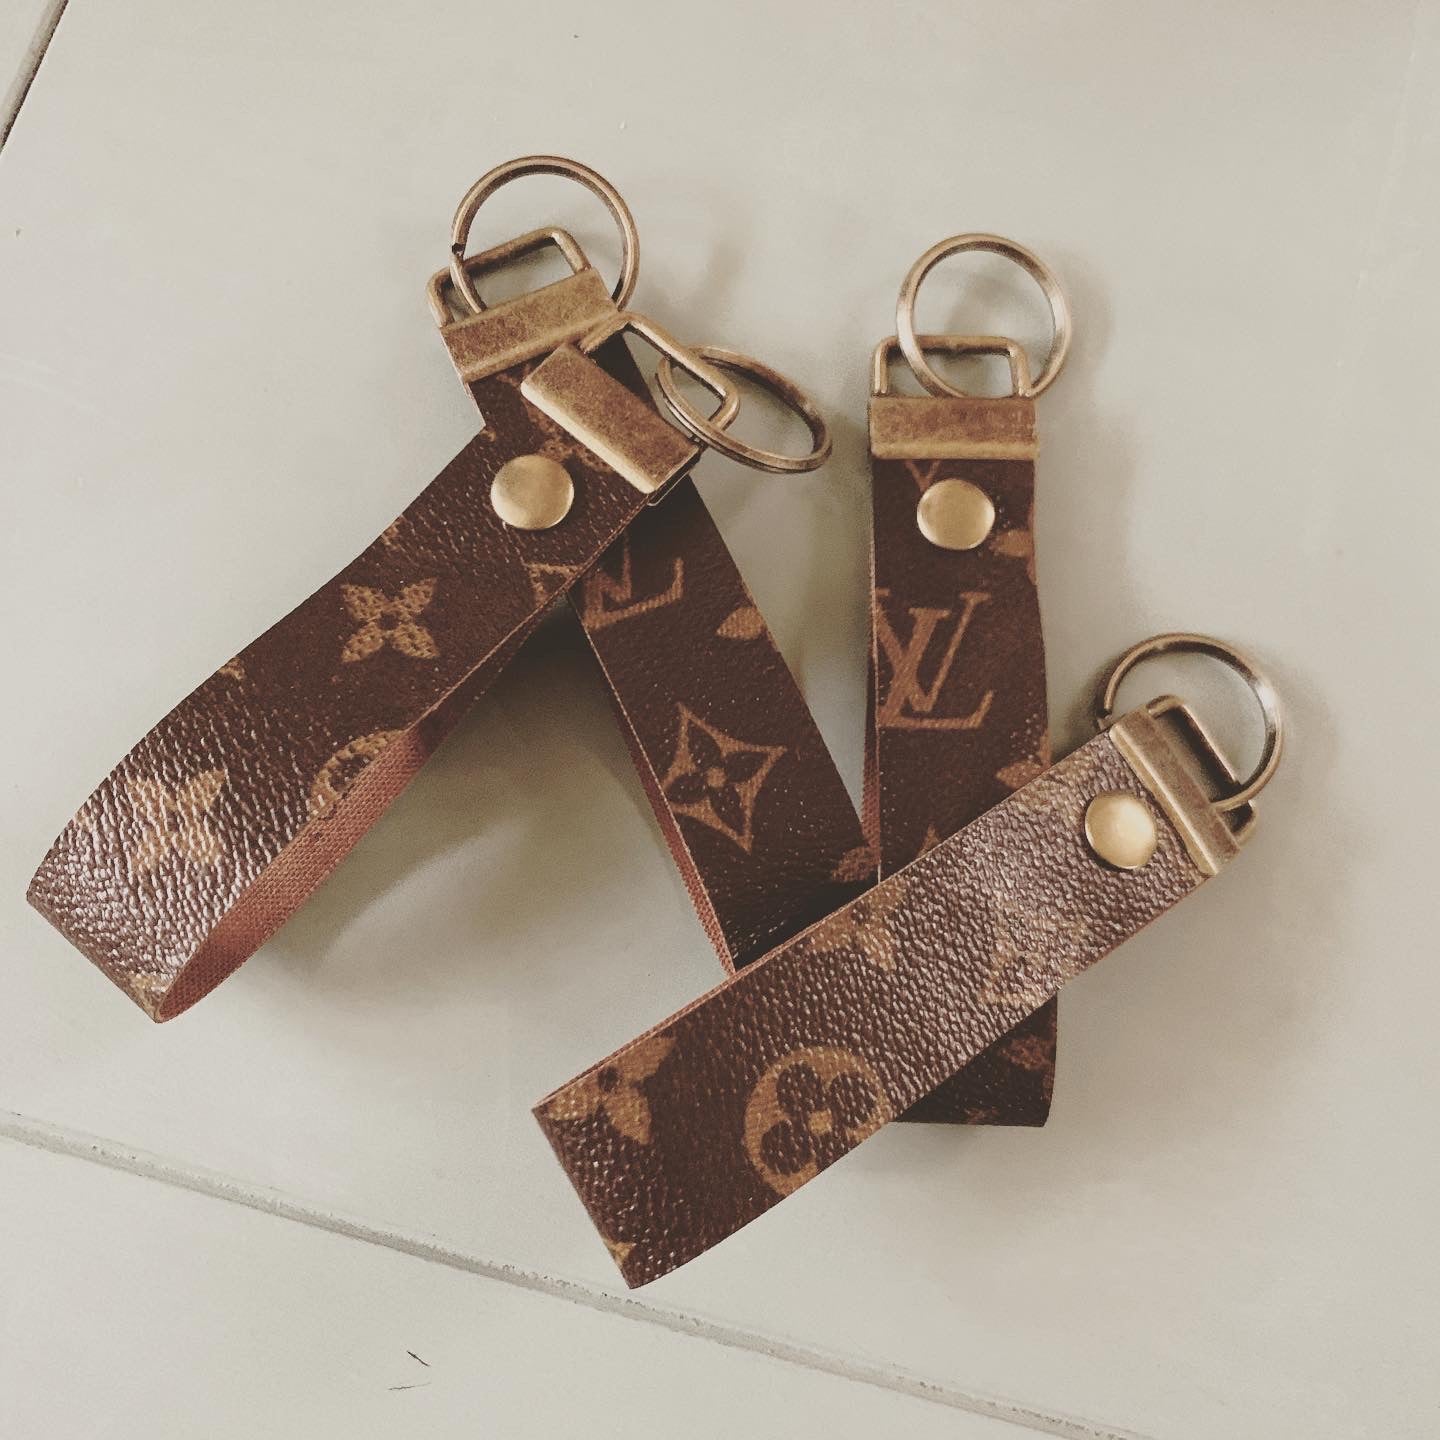 Capital LV Bag Charm And Key Holder  Luxury Key Holders and Bag Charms   Accessories  Men M00337  LOUIS VUITTON